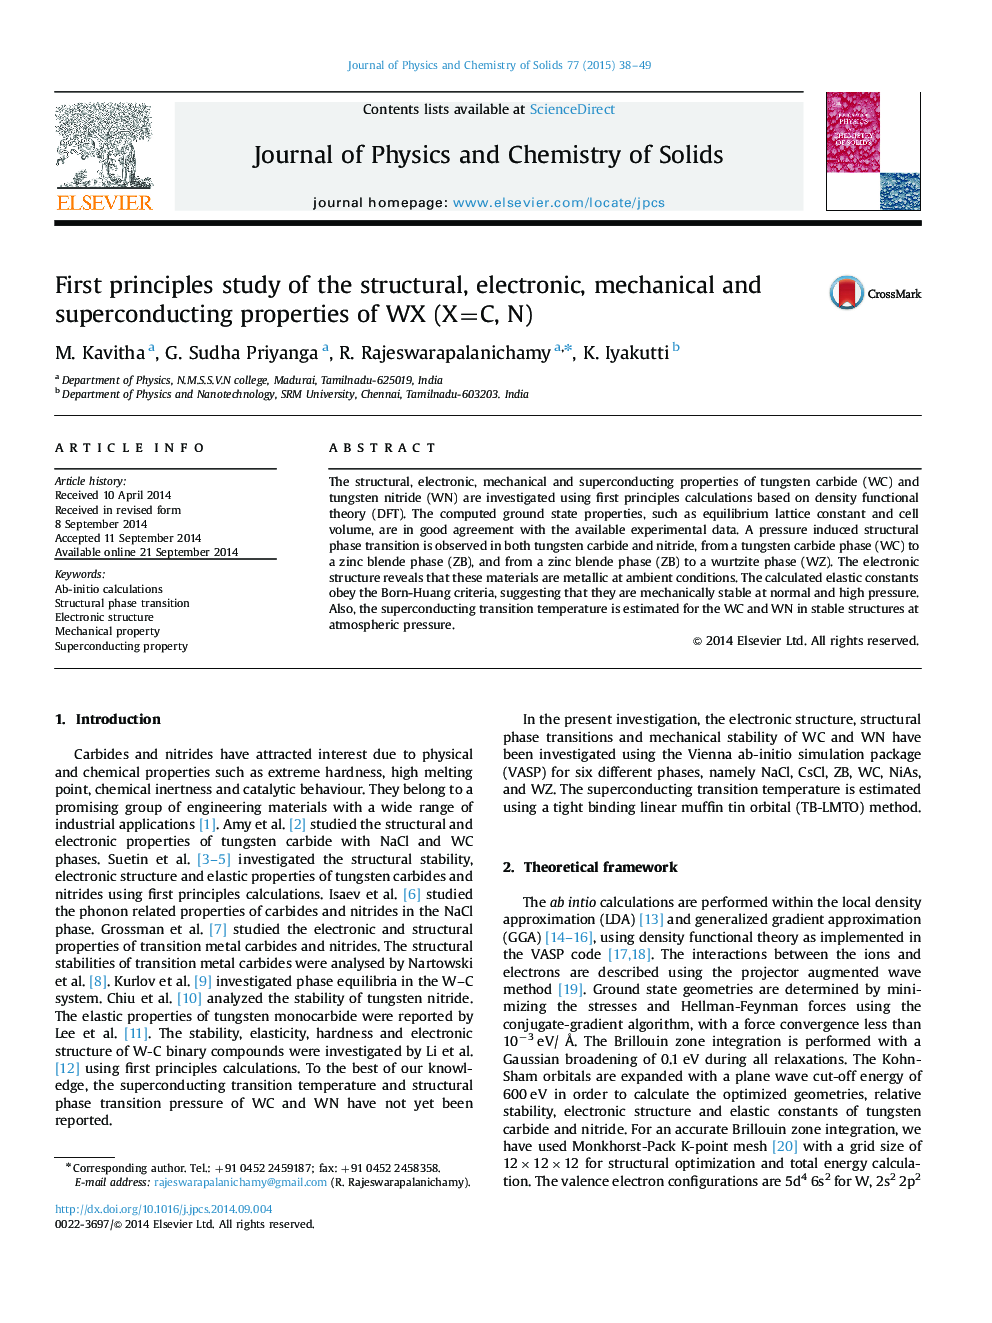 First principles study of the structural, electronic, mechanical and superconducting properties of WX (X=C, N)